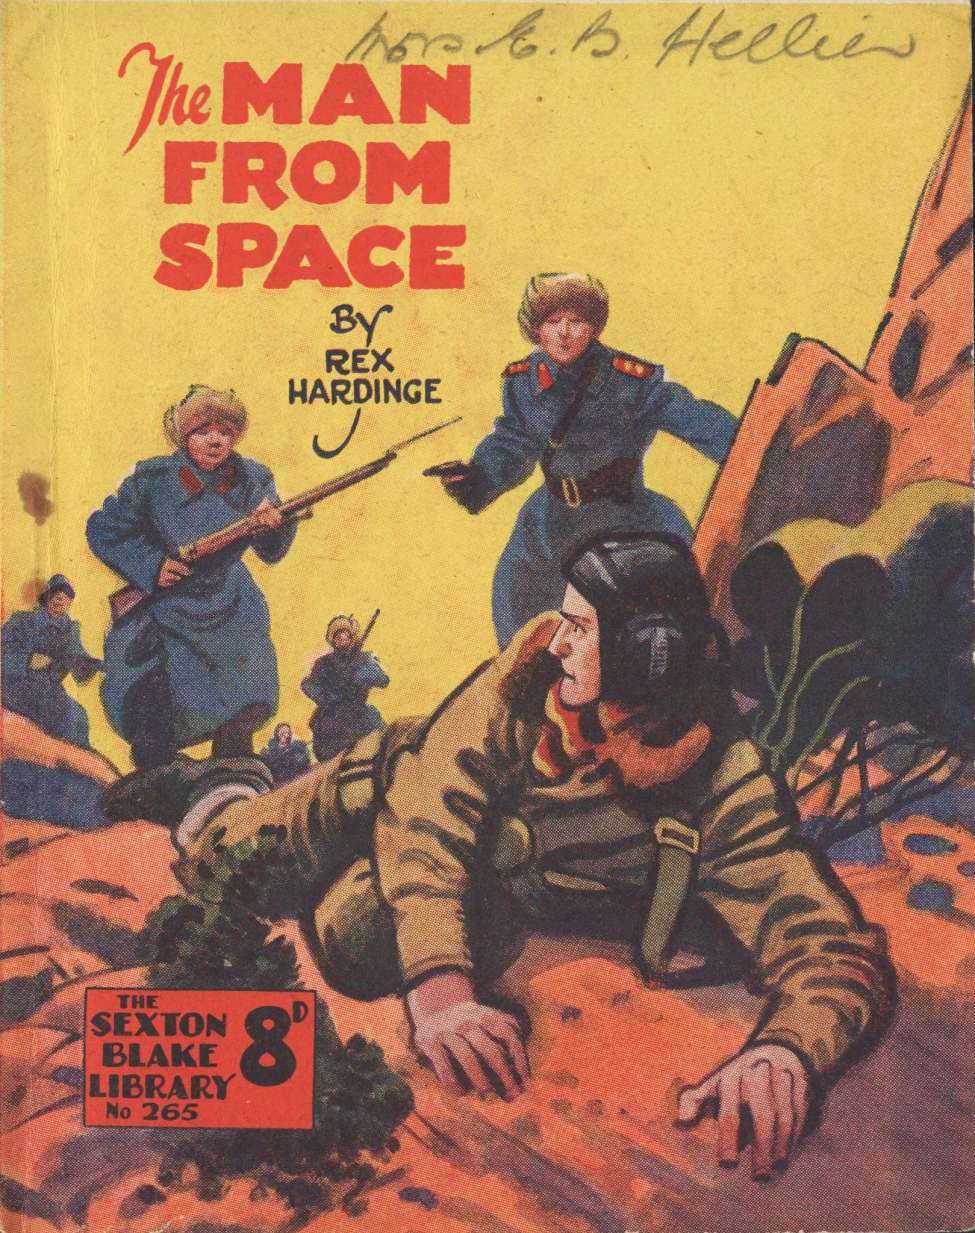 Book Cover For Sexton Blake Library S3 265 - The Man from Space